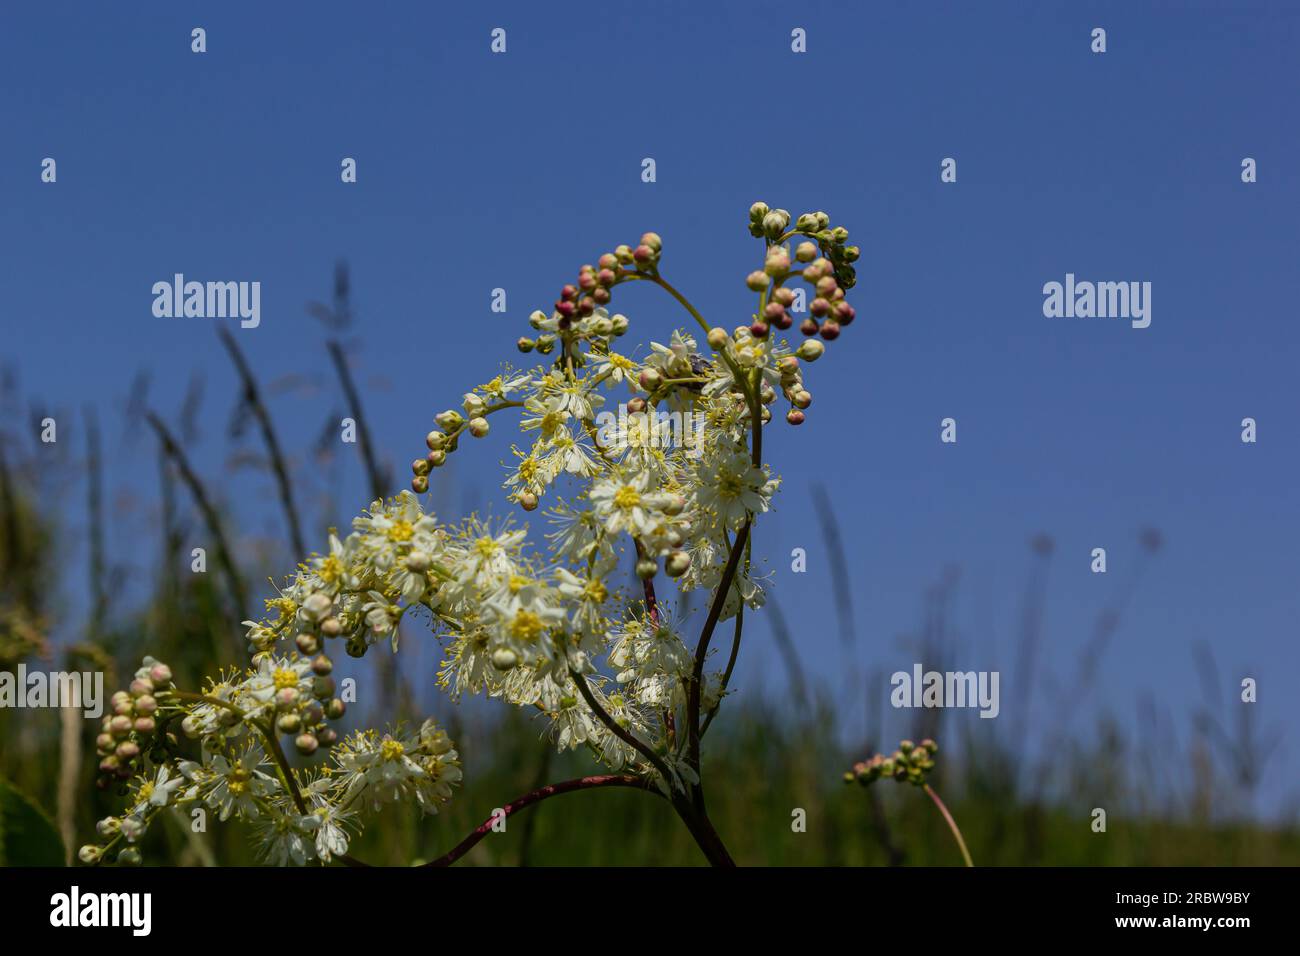 Flowering spring meadow. Filipendula vulgaris, commonly known as dropwort or fern-leaf dropwort. Place for text, blurred background. Stock Photo